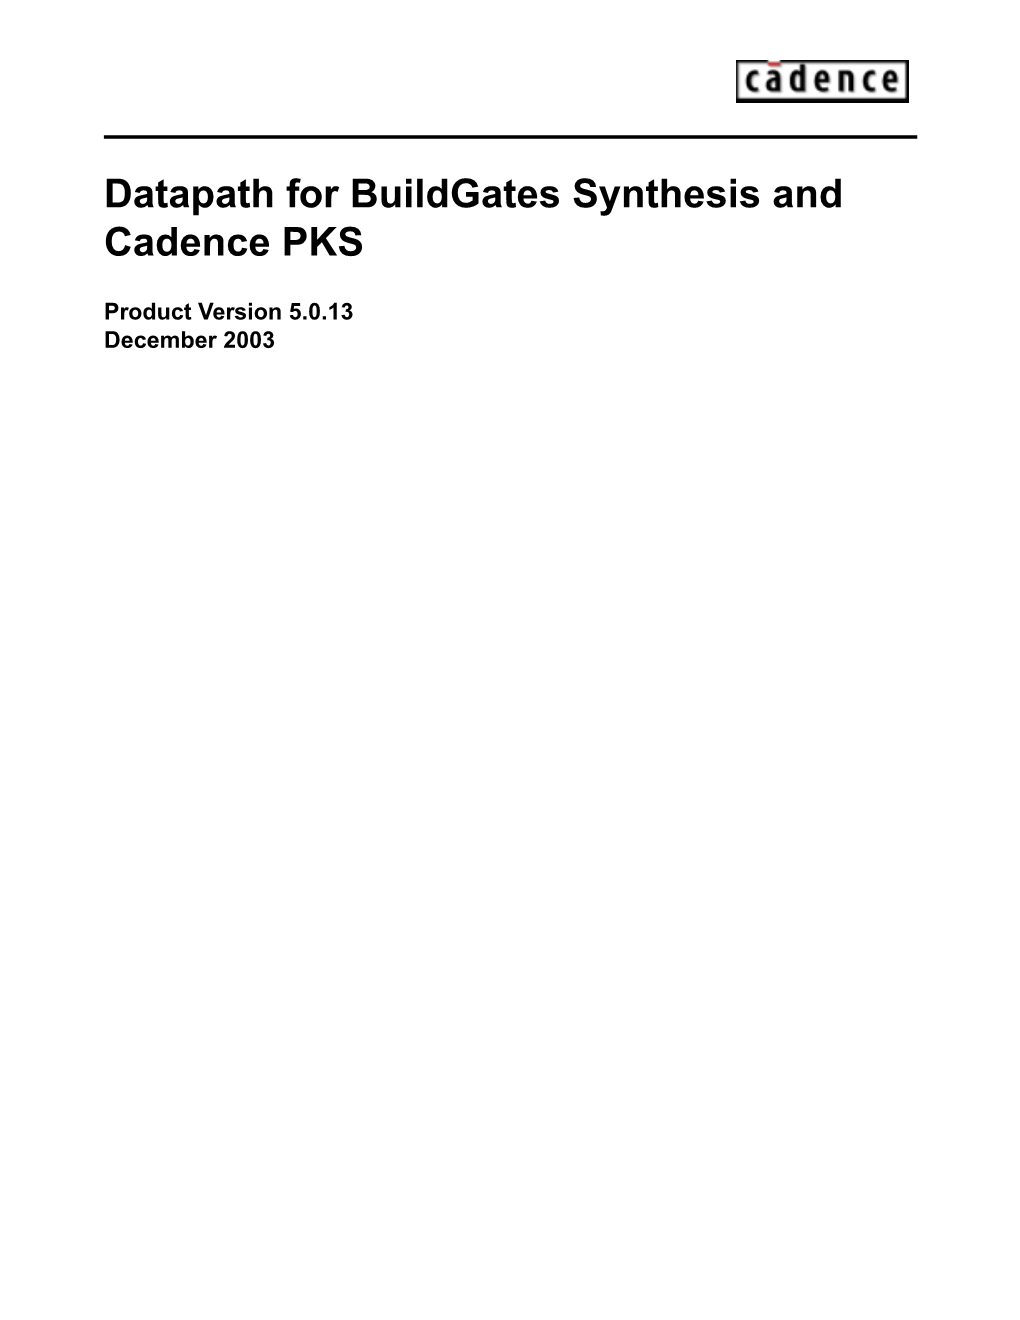 Datapath for Buildgates Synthesis and Cadence PKS